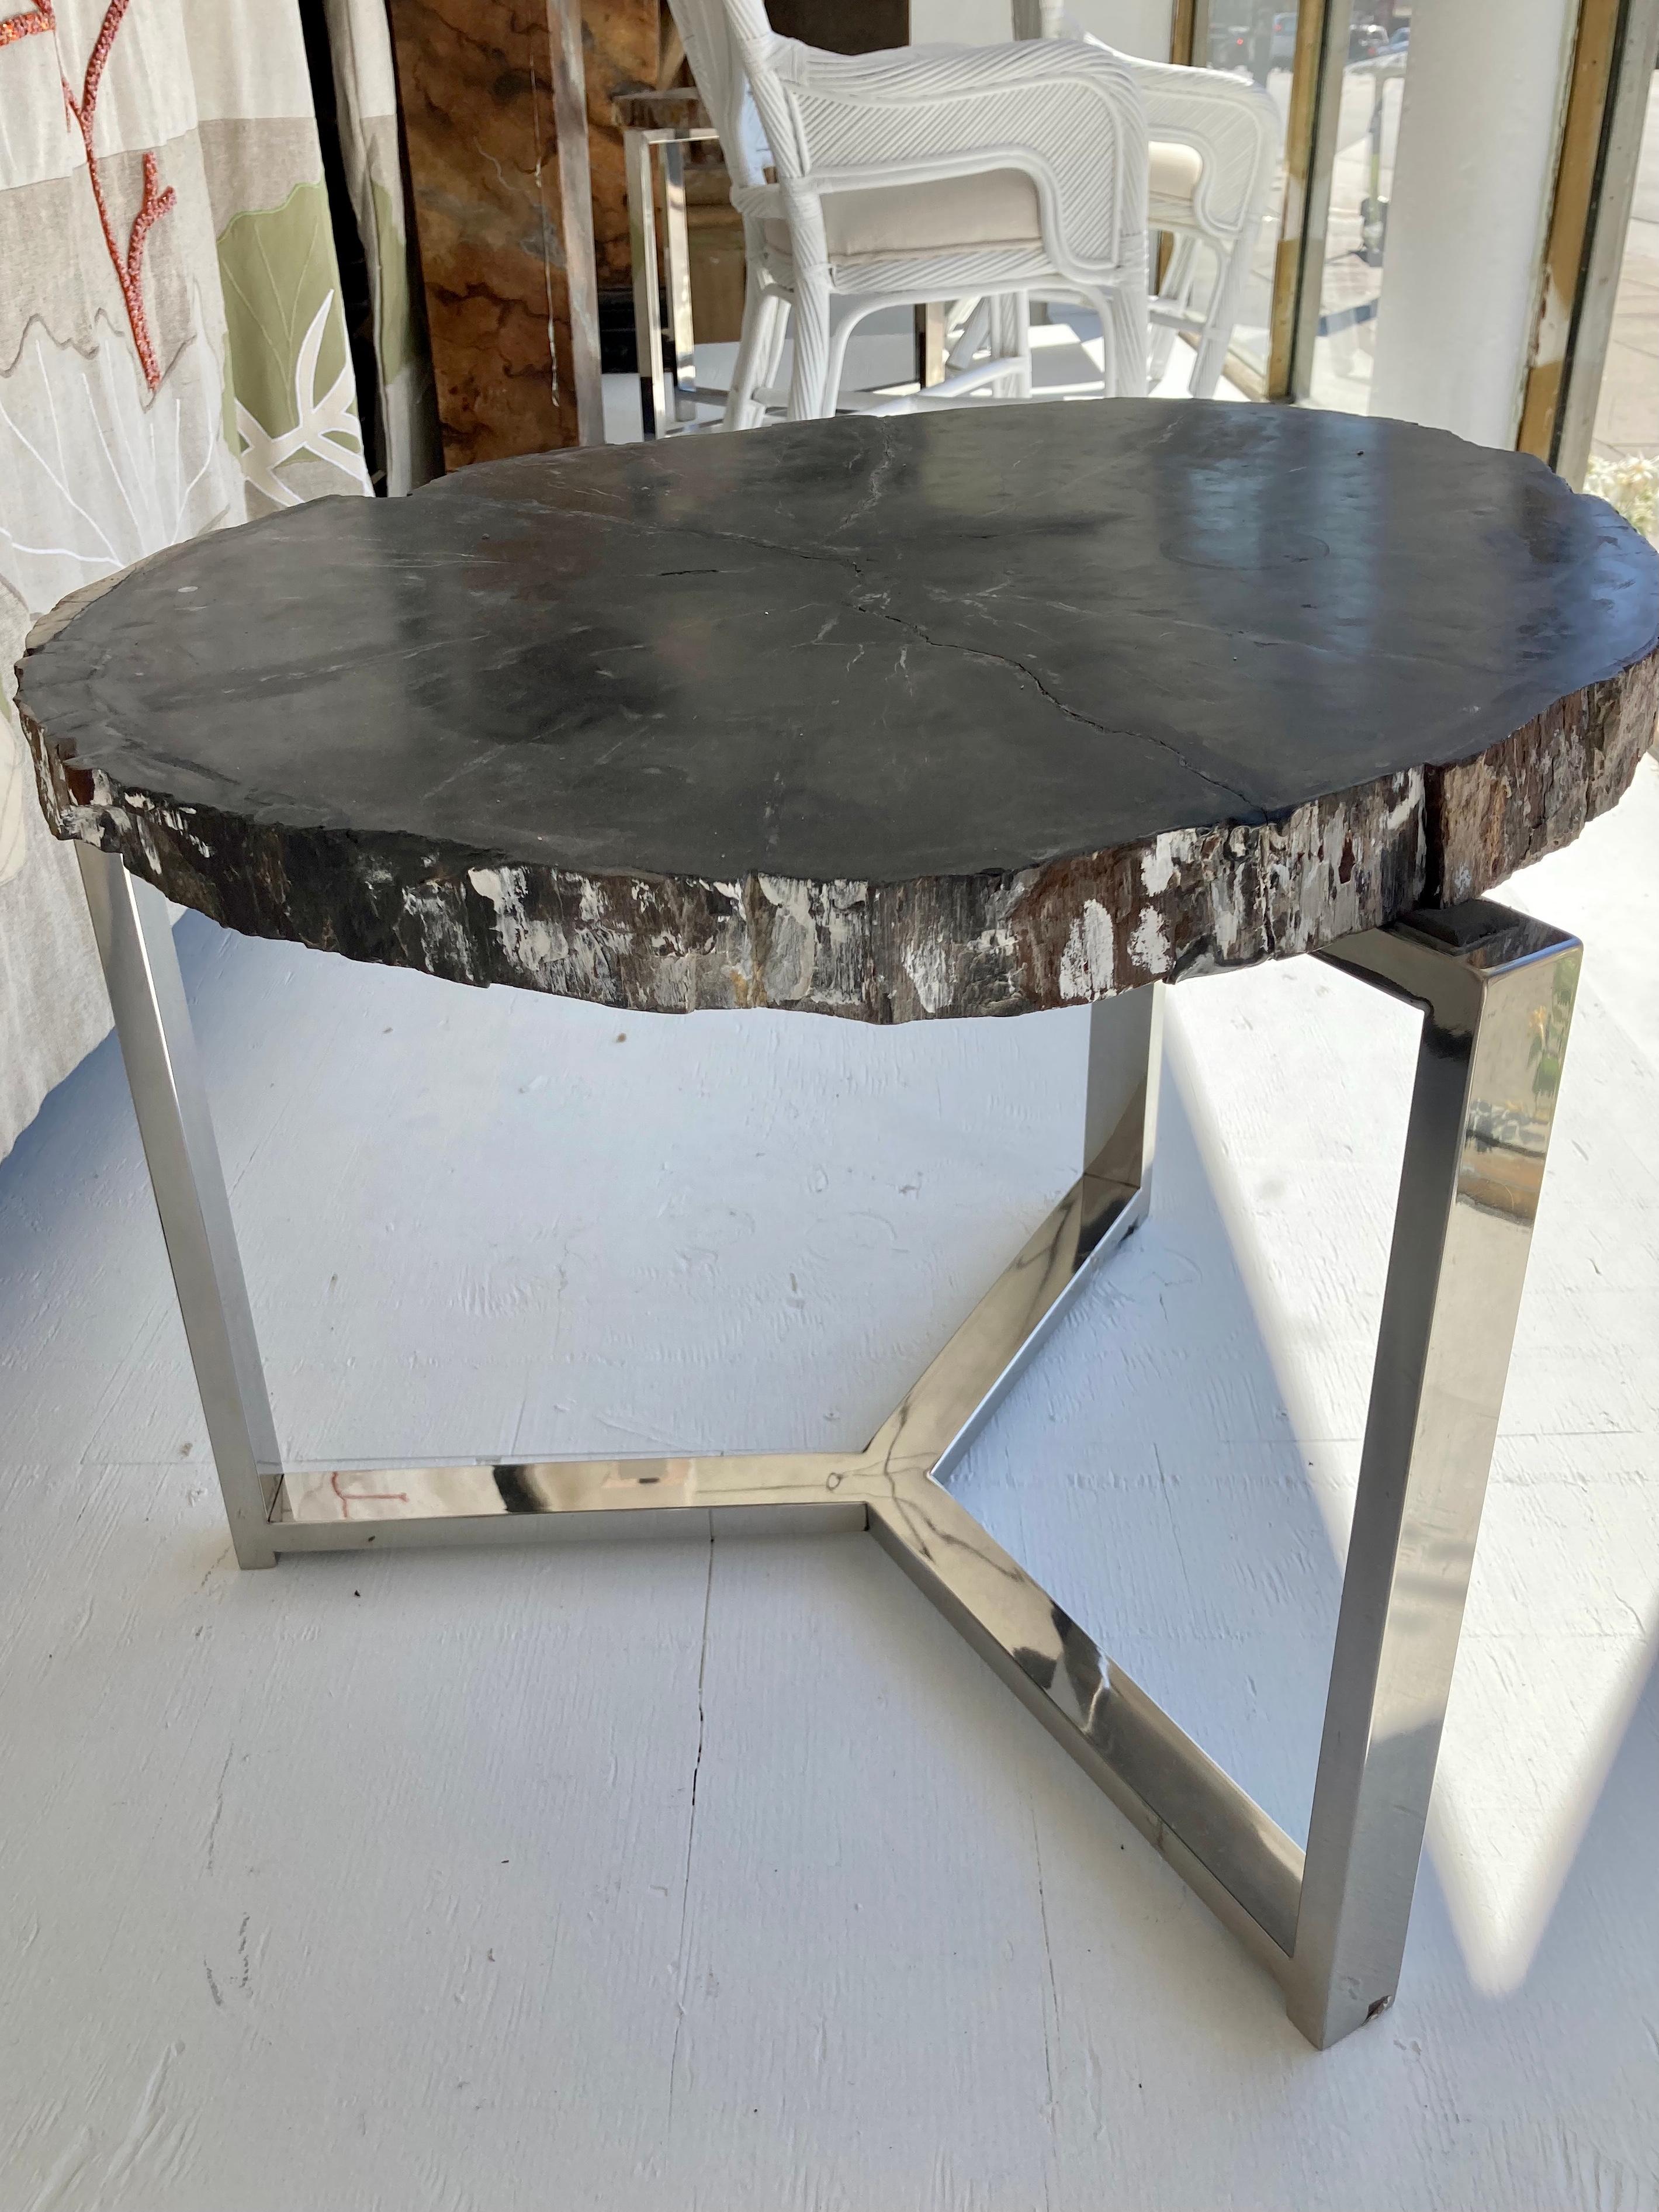 Petrified wood stone table top with custom made 3 leg chrome base. Very modern looking with gorgeous character top  Very heavy with solid chrome base. Add some history and character to your home.